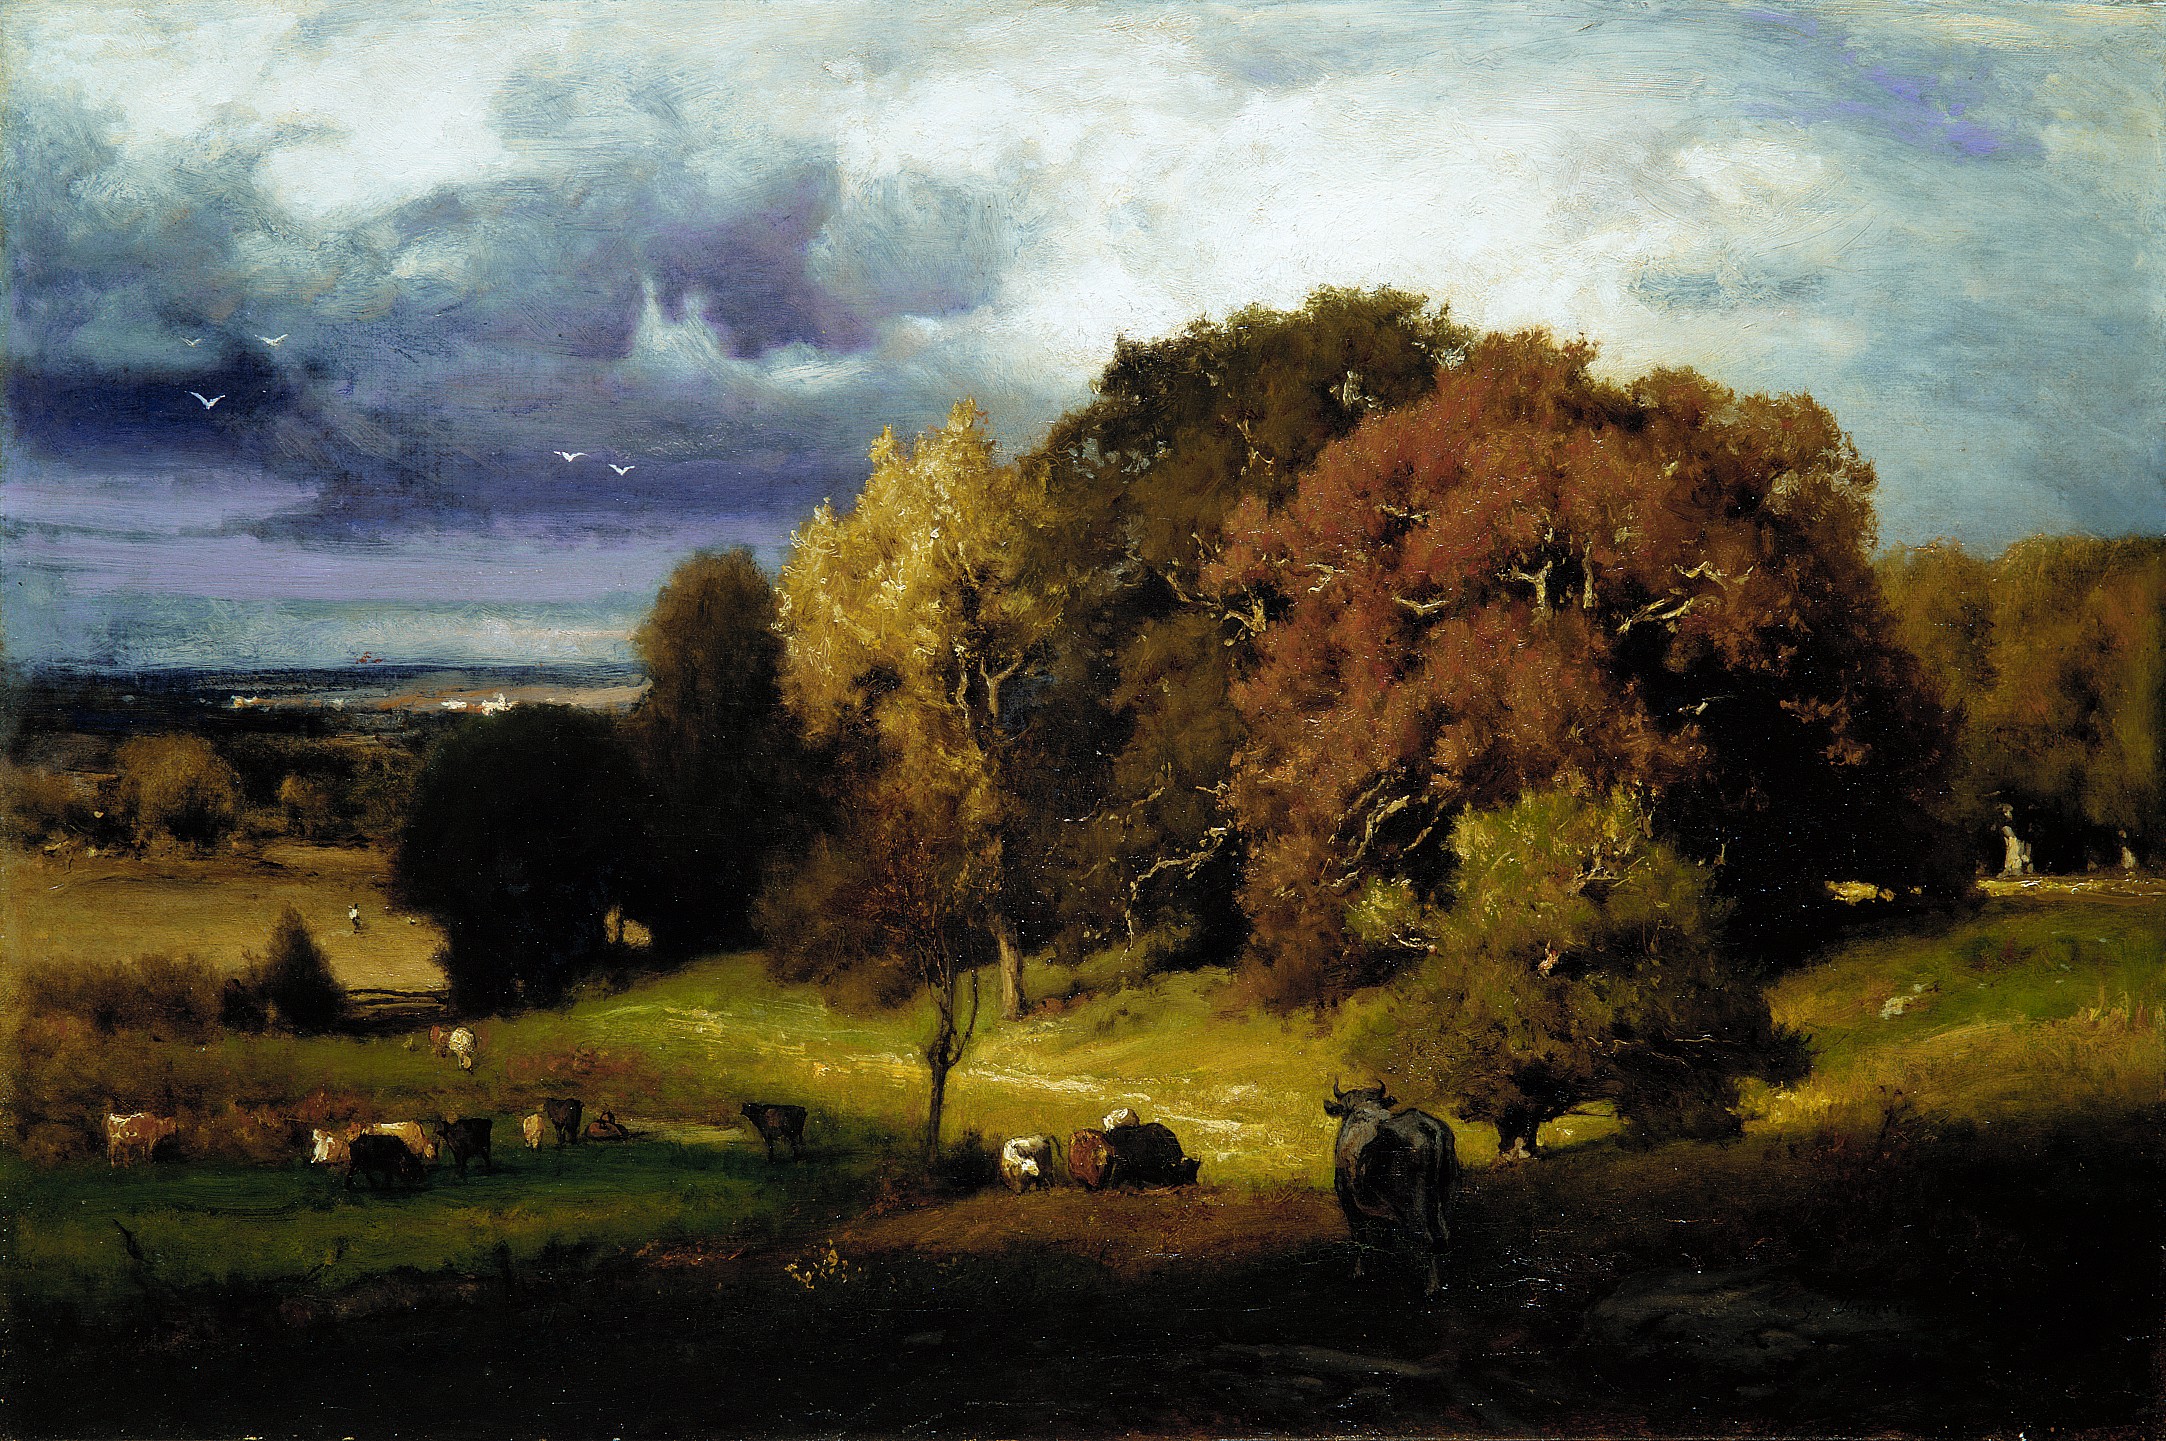 Autumn Oaks, by George Inness